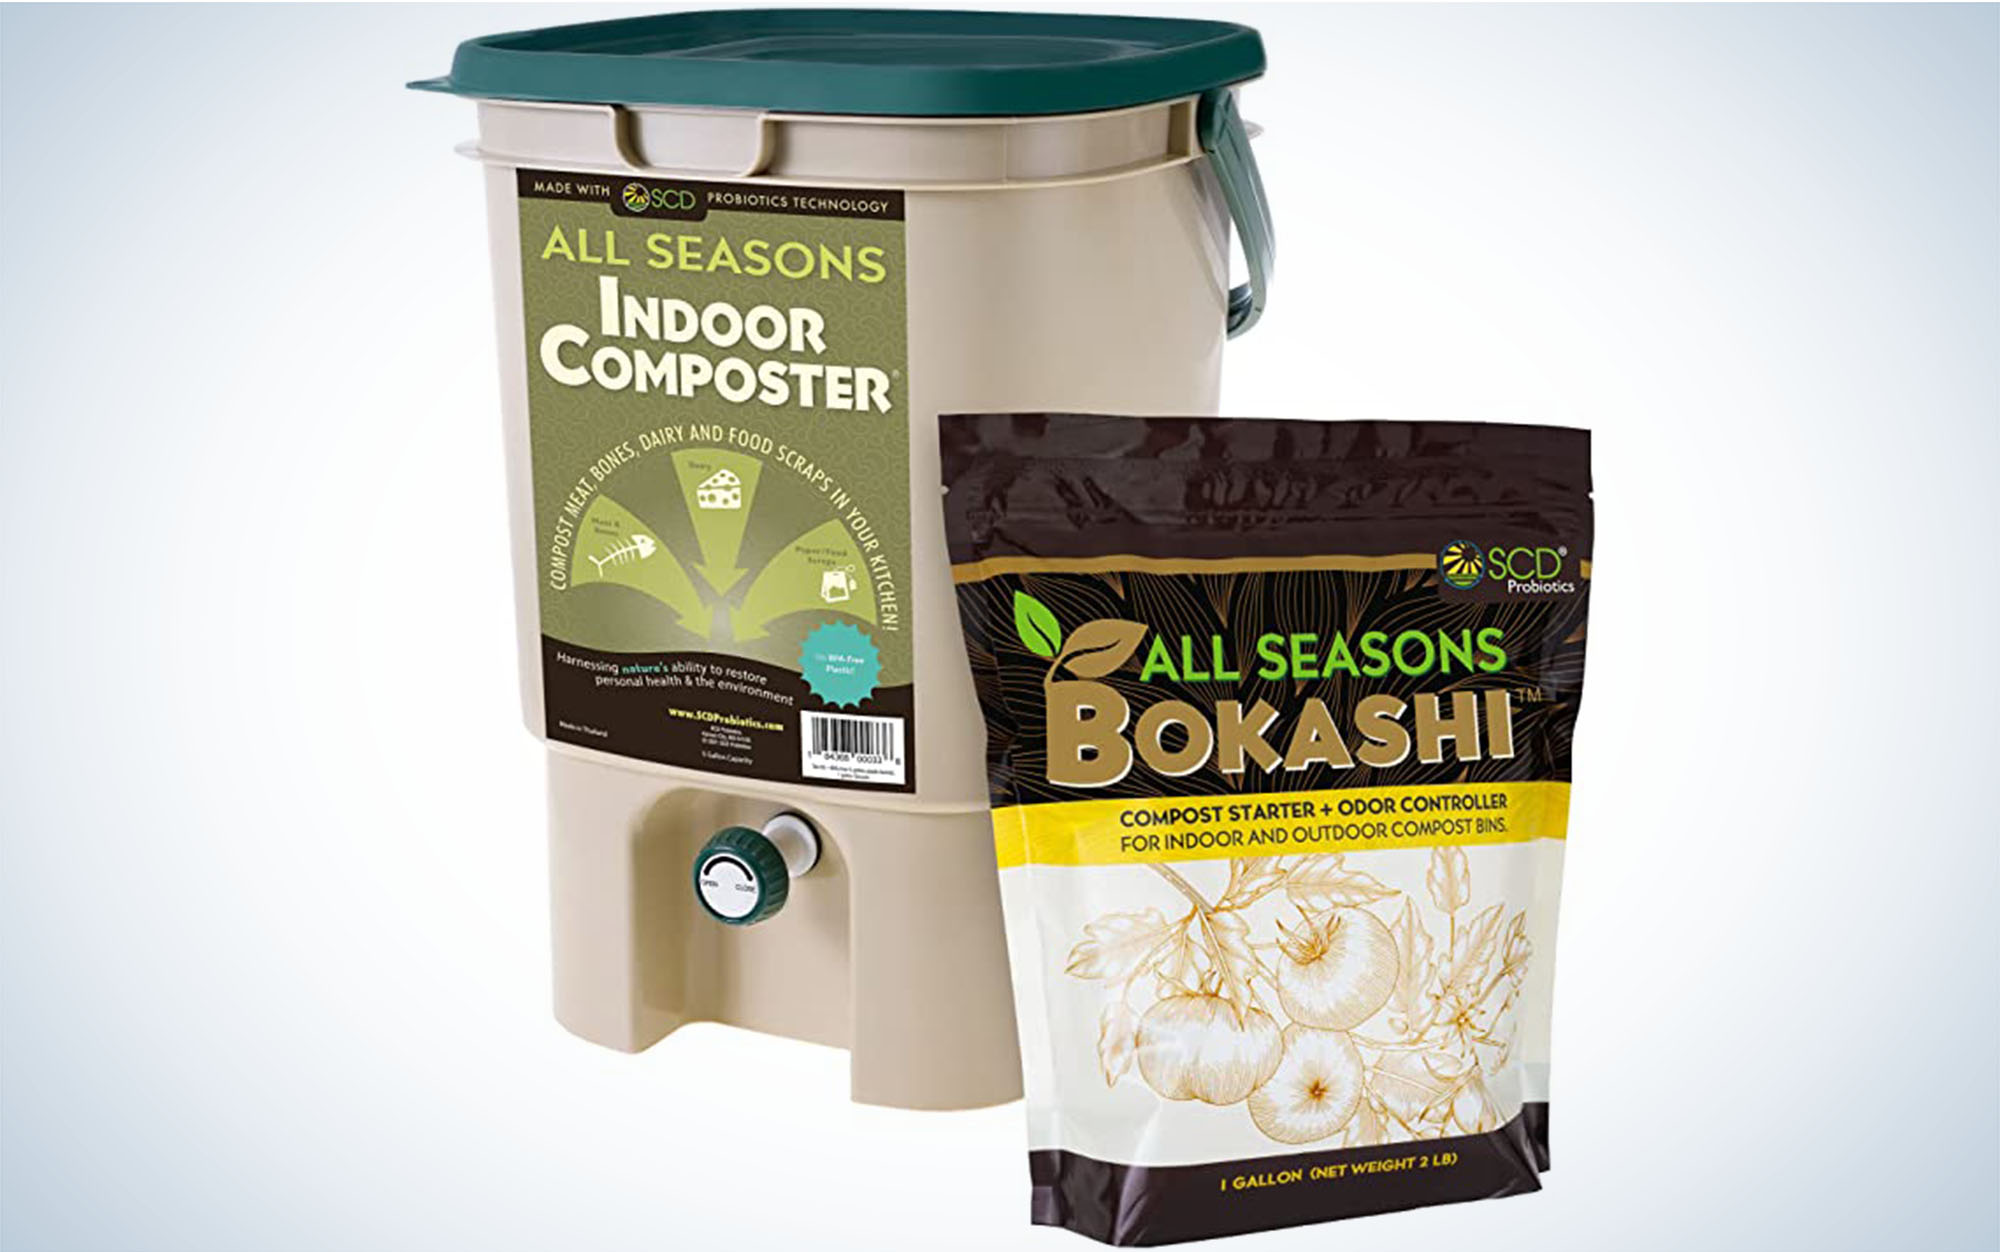 The All Seasons Indoor Composter Starter Kit is one of the best compost tumblers.